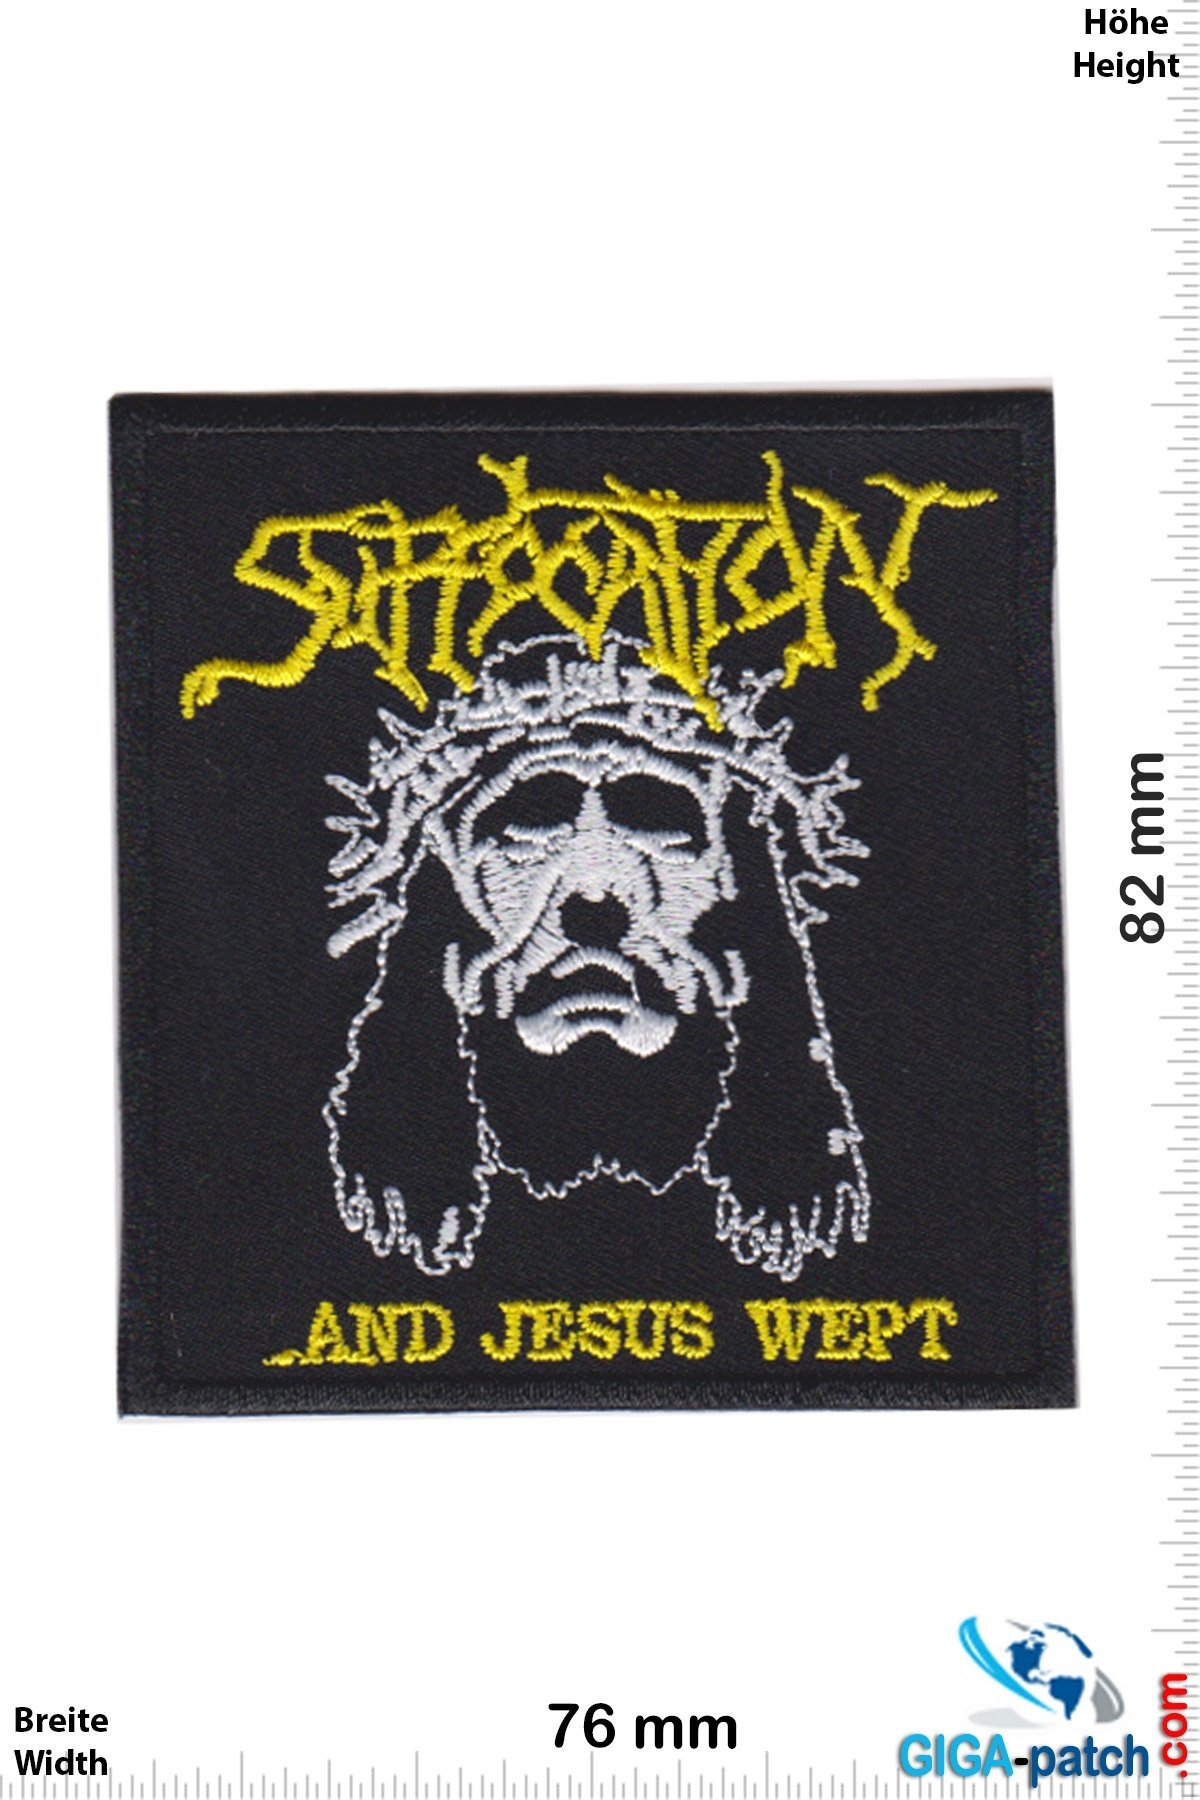 Suffocation Suffocation - and Jesus Wept  - Brutal Technical Death Metal band